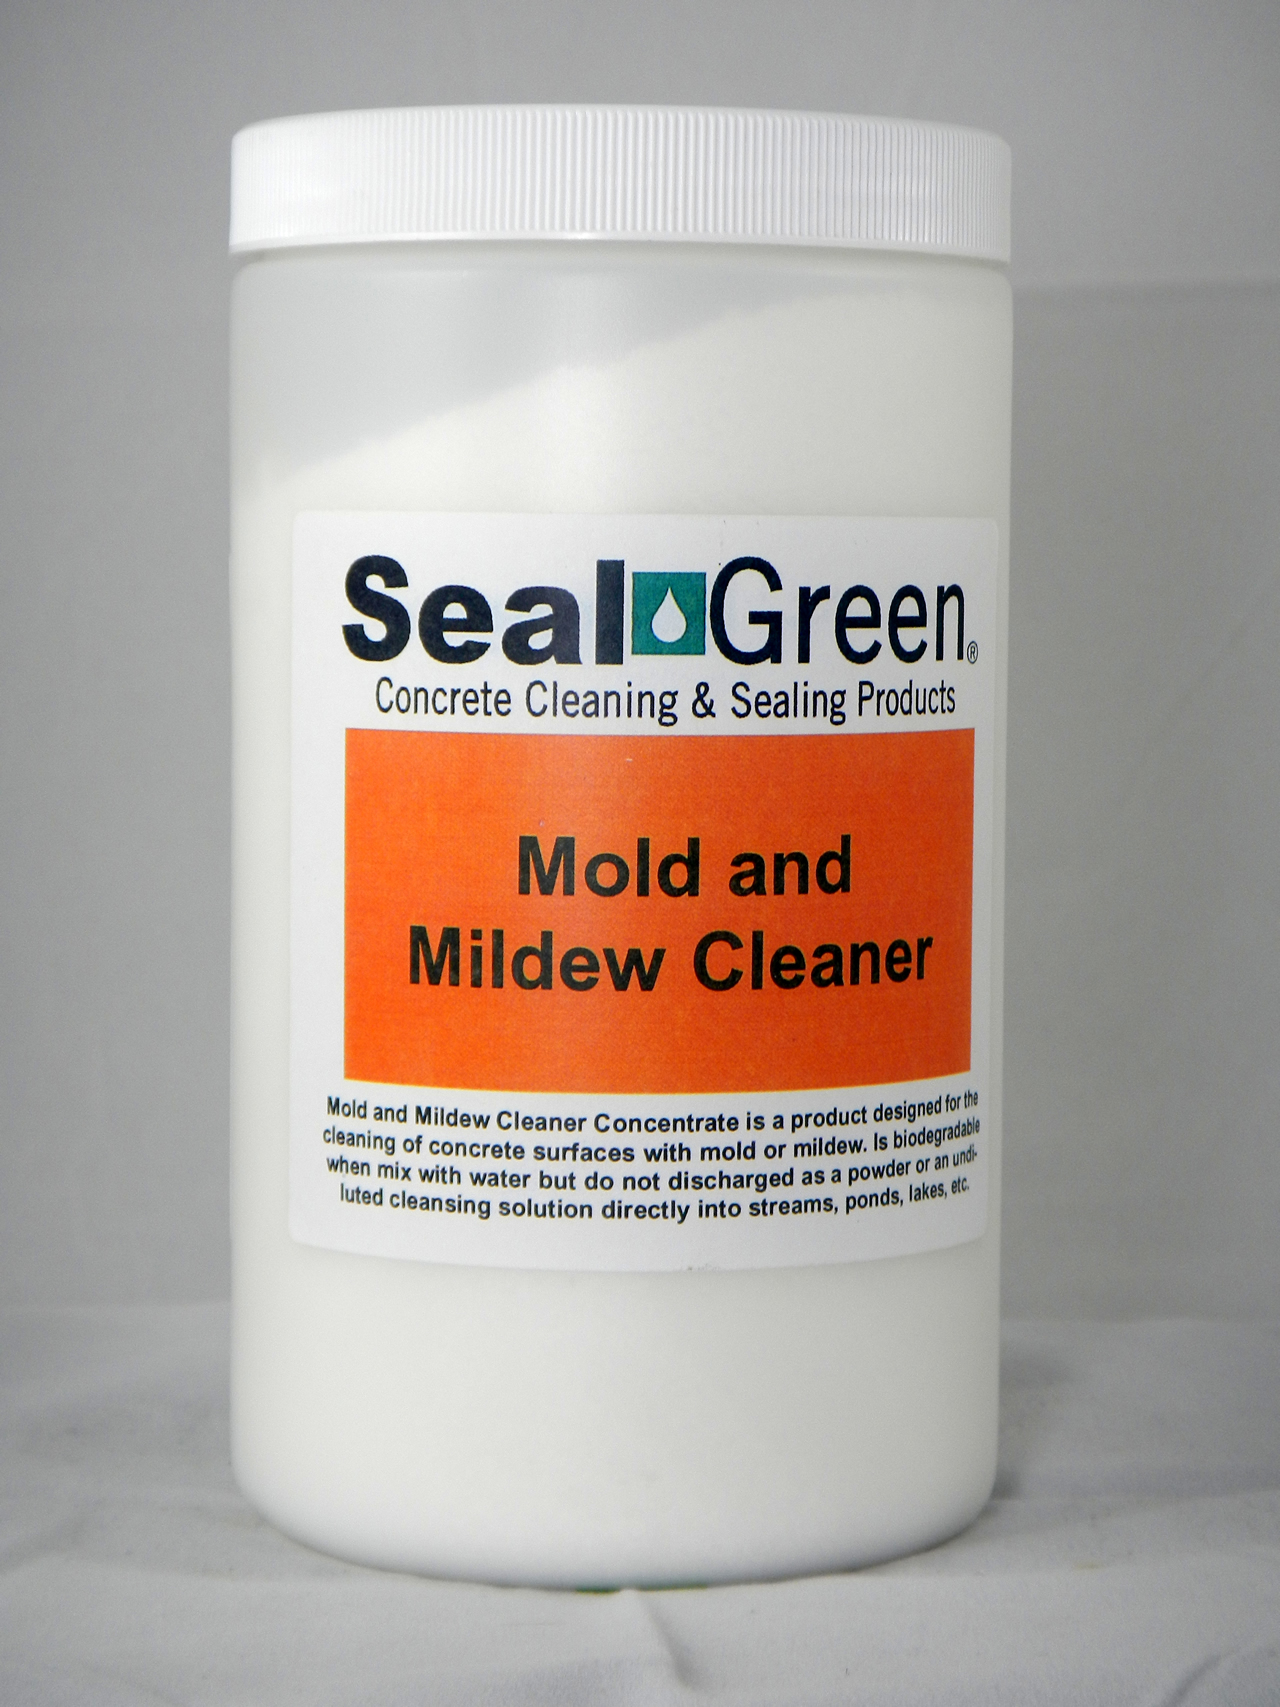 Is SealGreen Mold Remover compatible with limestone?